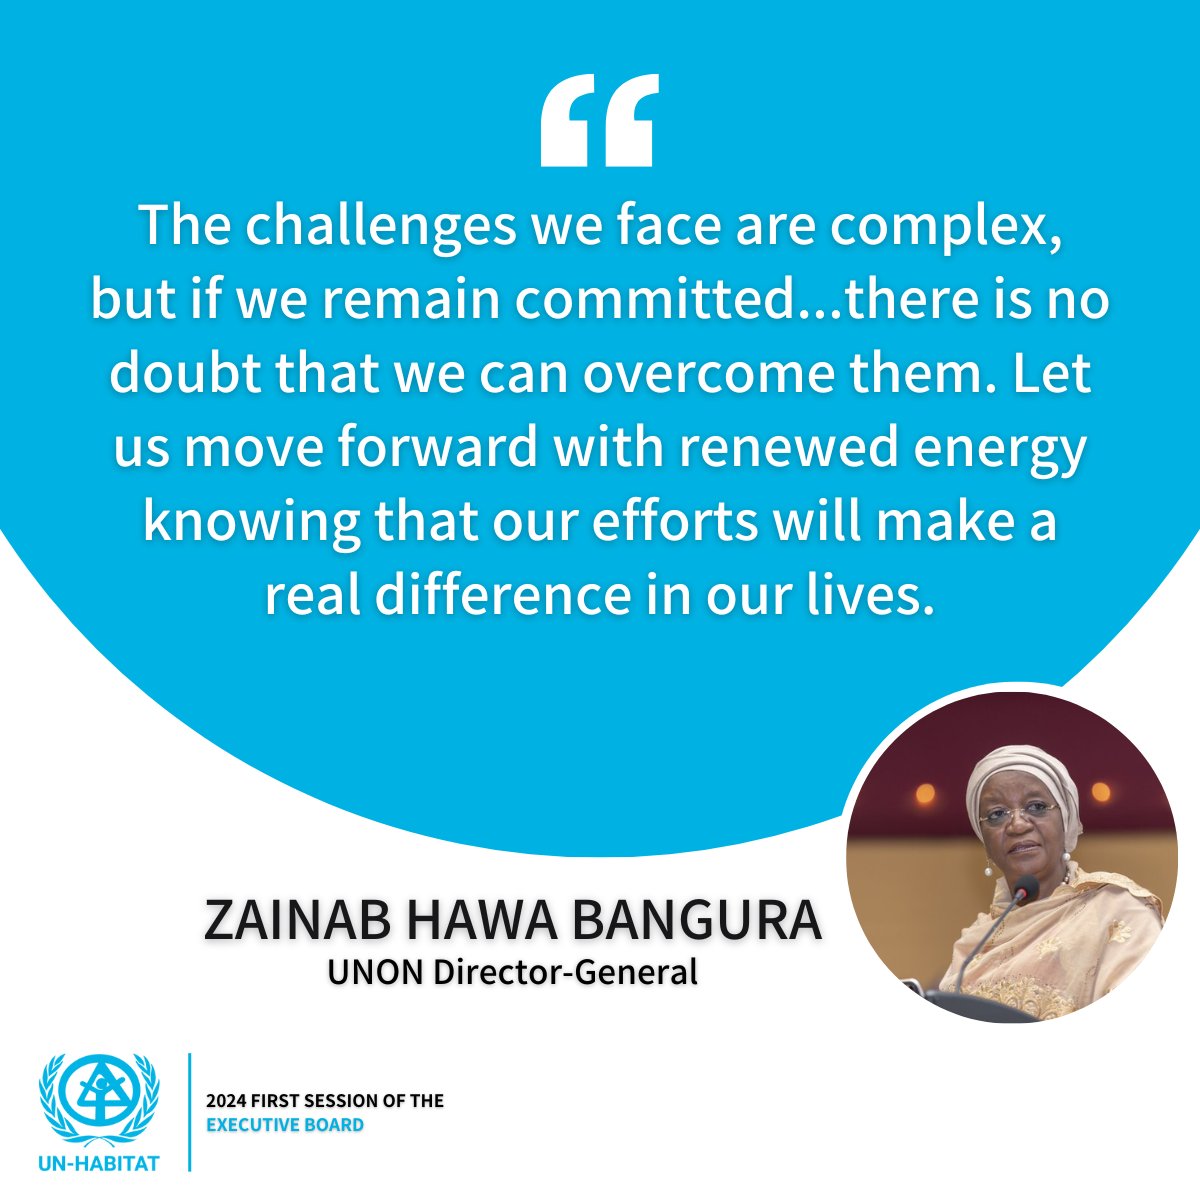 'The challenges we face are complex but if we remain committed there is no doubt that we can overcome them. Let us move forward with renewed energy knowing that our efforts will make a real difference in our lives.' -@ODG_UNON DG @ZainabHawa at the UN-Habitat Executive Board.